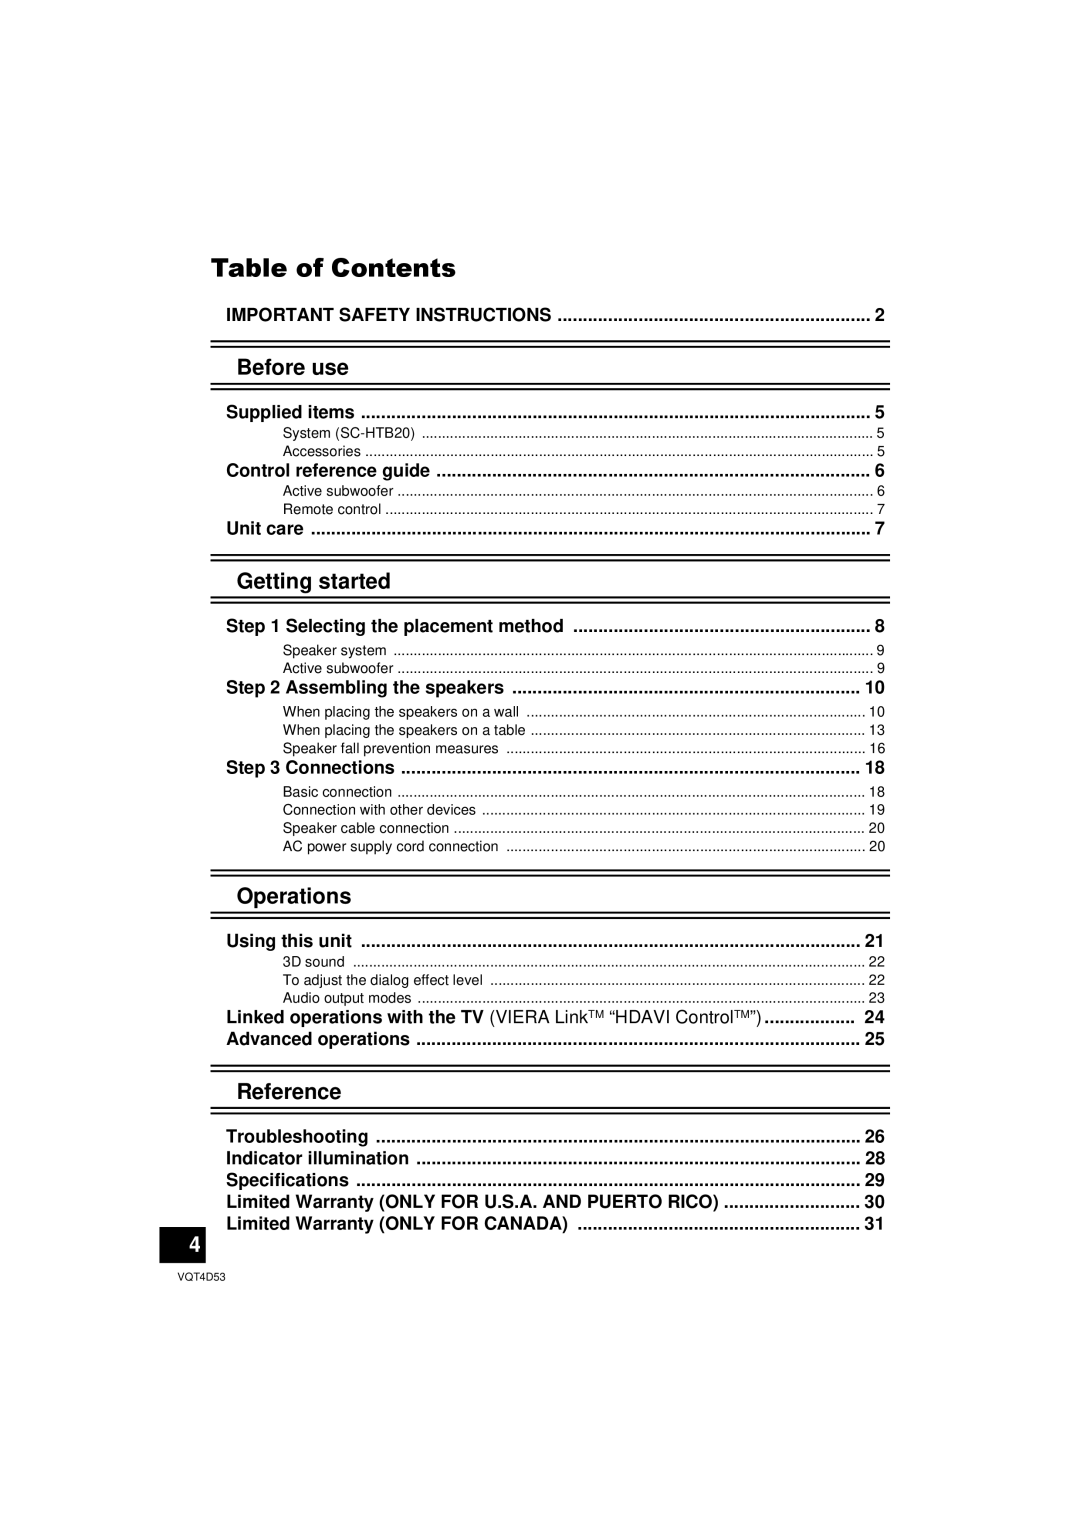 Panasonic SC-HTB20 owner manual Table of Contents, Before use, Getting started, Operations, Reference 